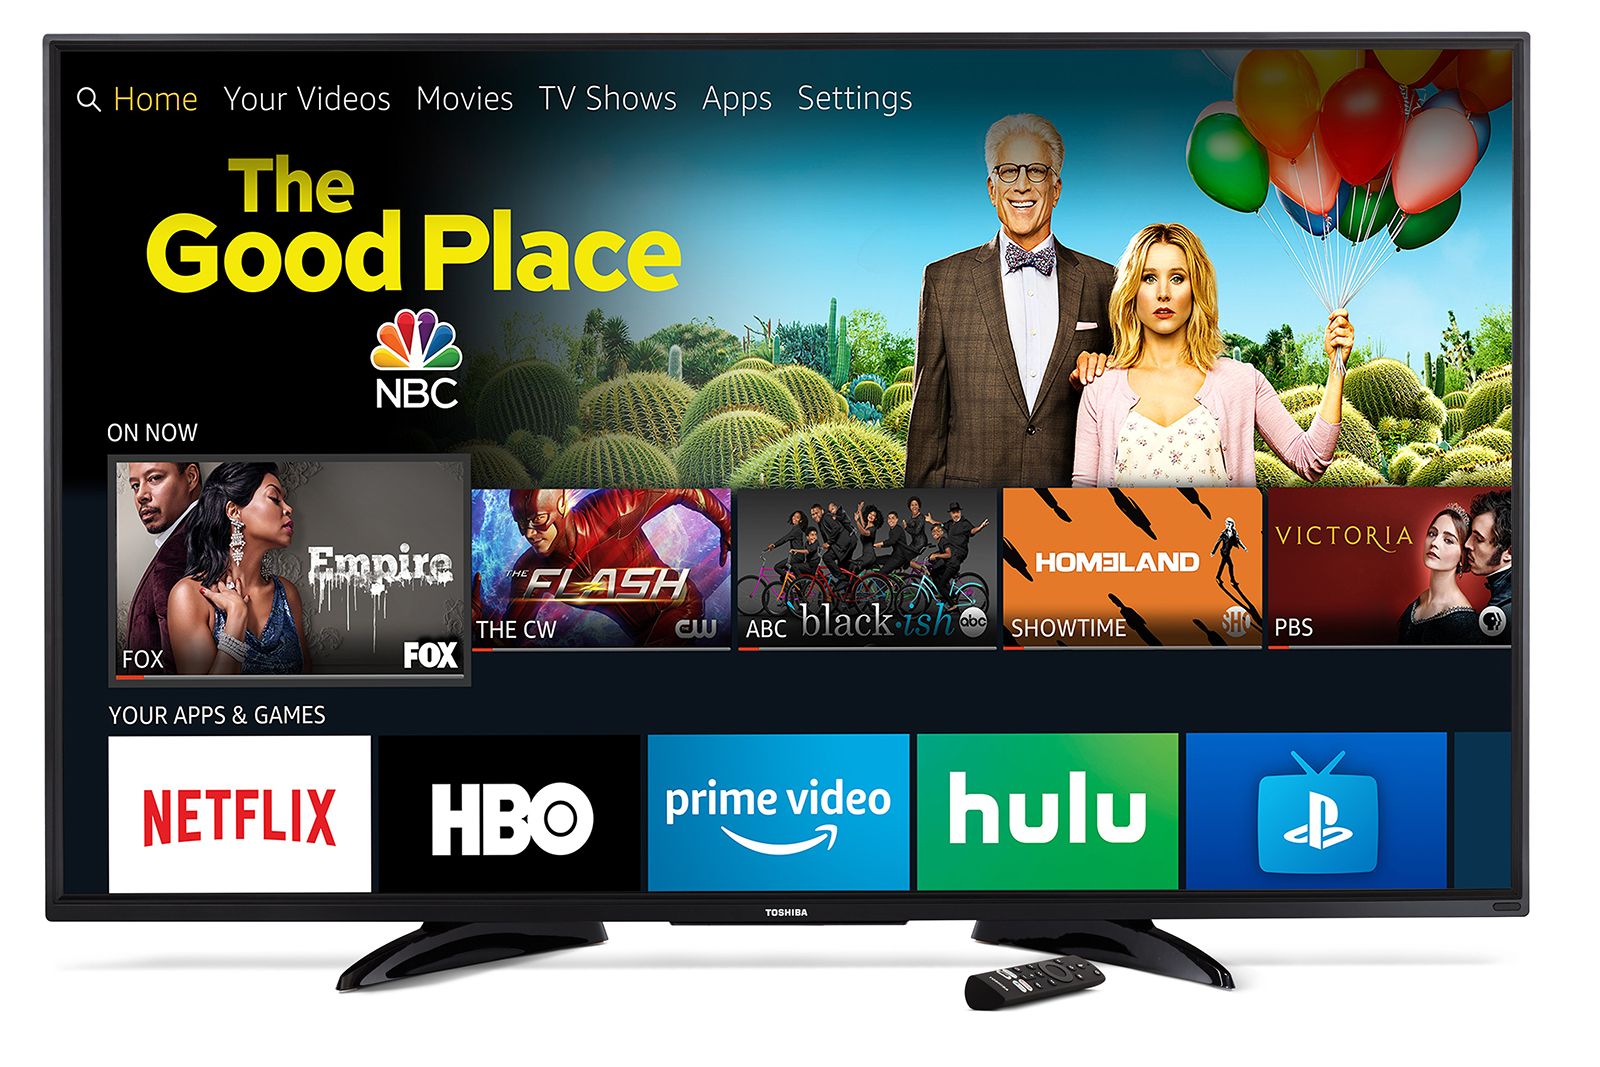 Amazon 4K Smart TV on the cards for UK Freeview HD tuner and Fire TV built in image 1